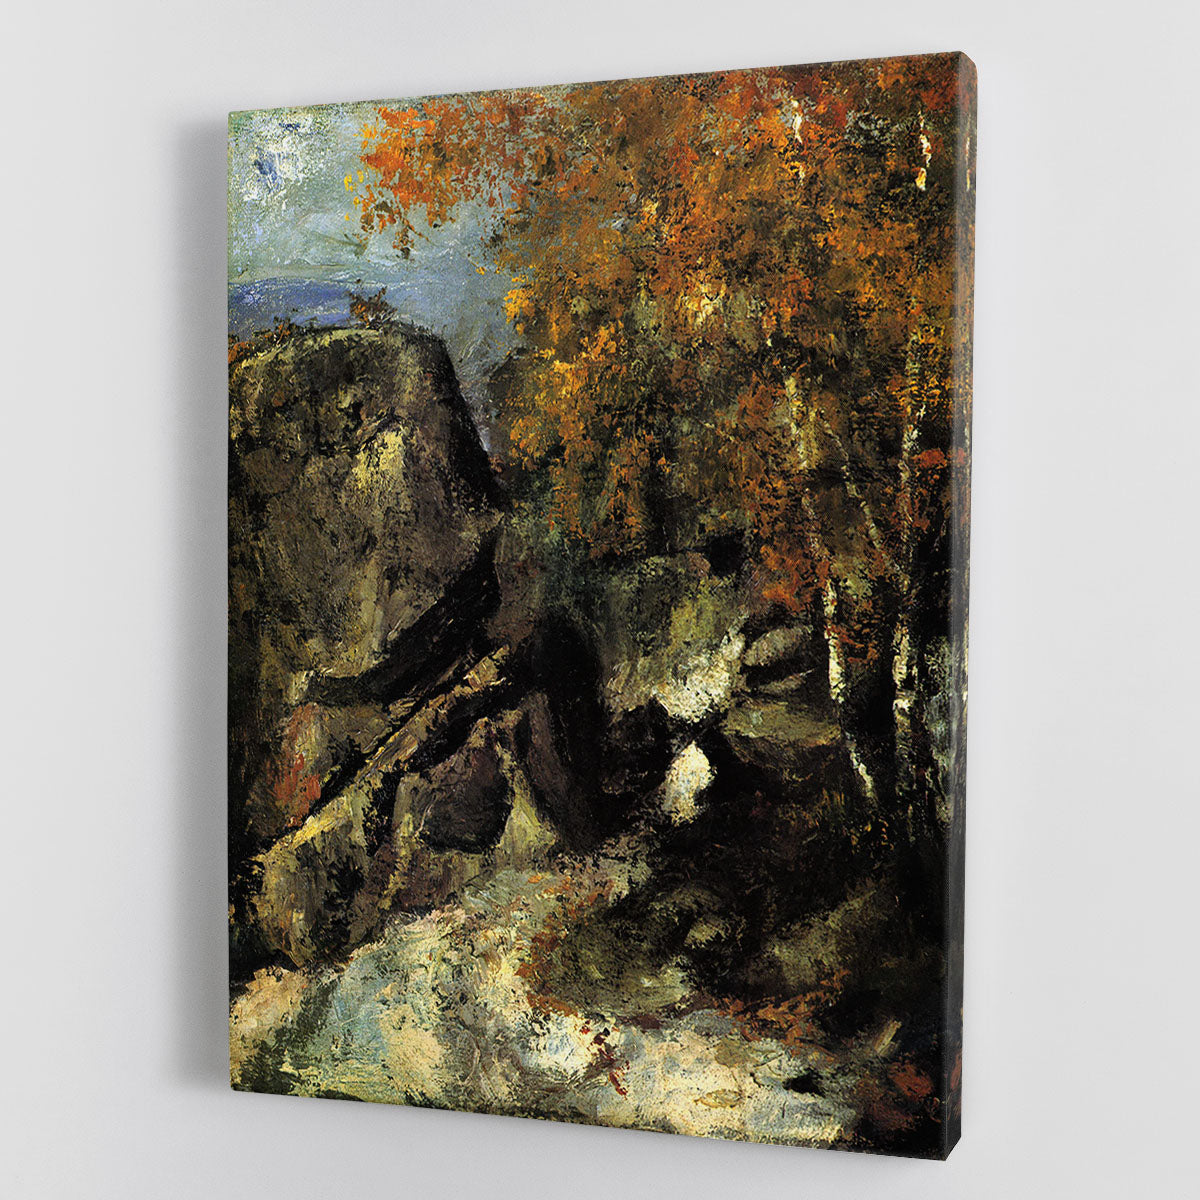 Rocks in Fountanbleu Forest by Cezanne Canvas Print or Poster - Canvas Art Rocks - 1